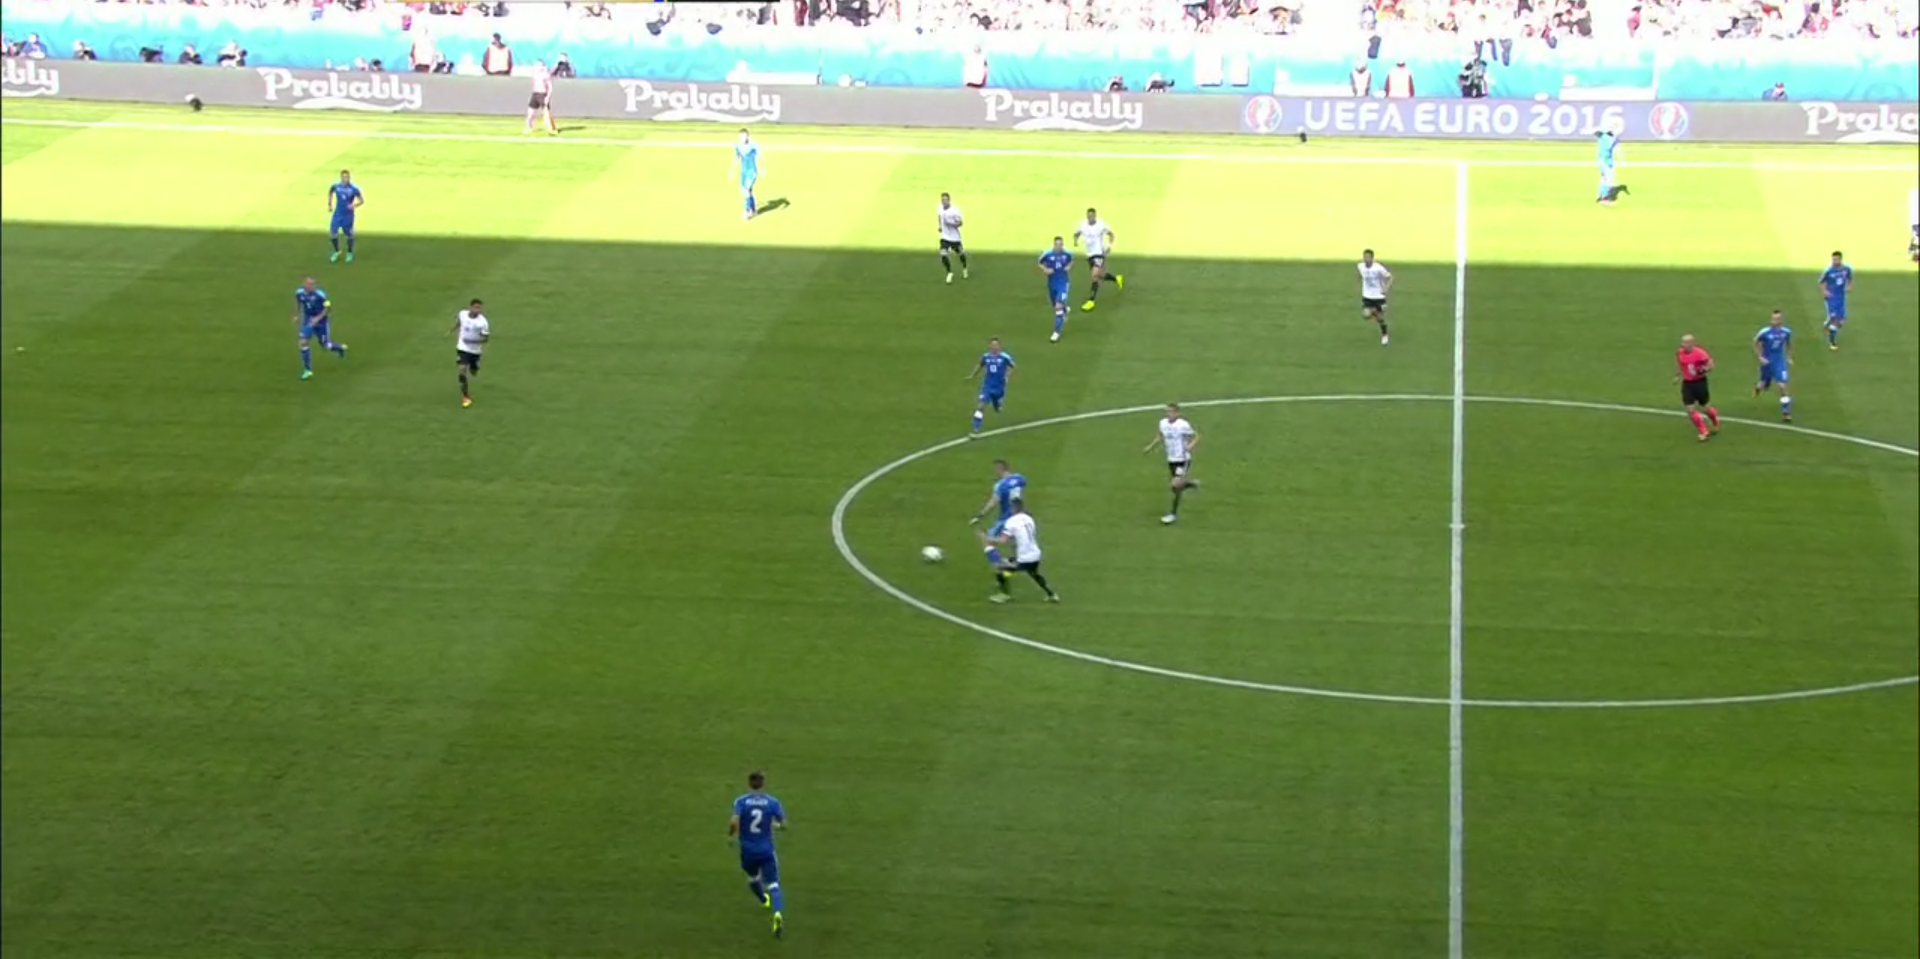 German midfielders pressing early in the center of the field.